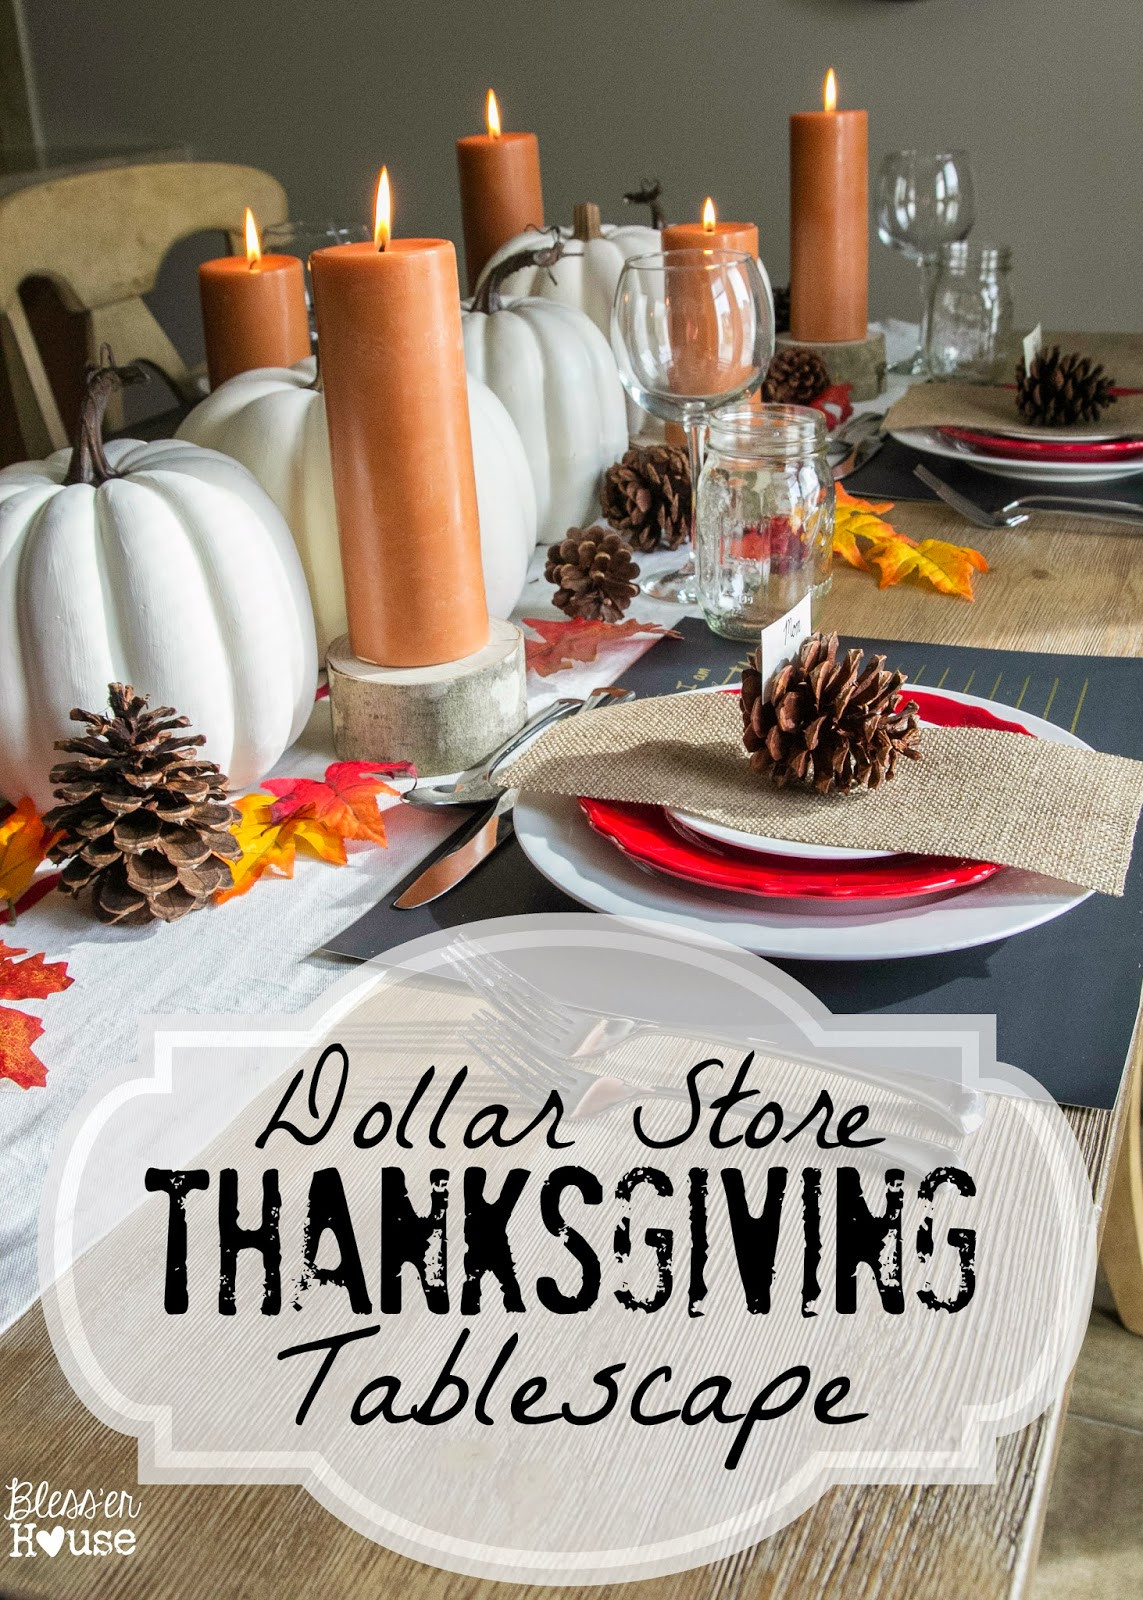 Inexpensive Thanksgiving Table Decorations
 Dollar Store Thanksgiving Tablescape Bless er House